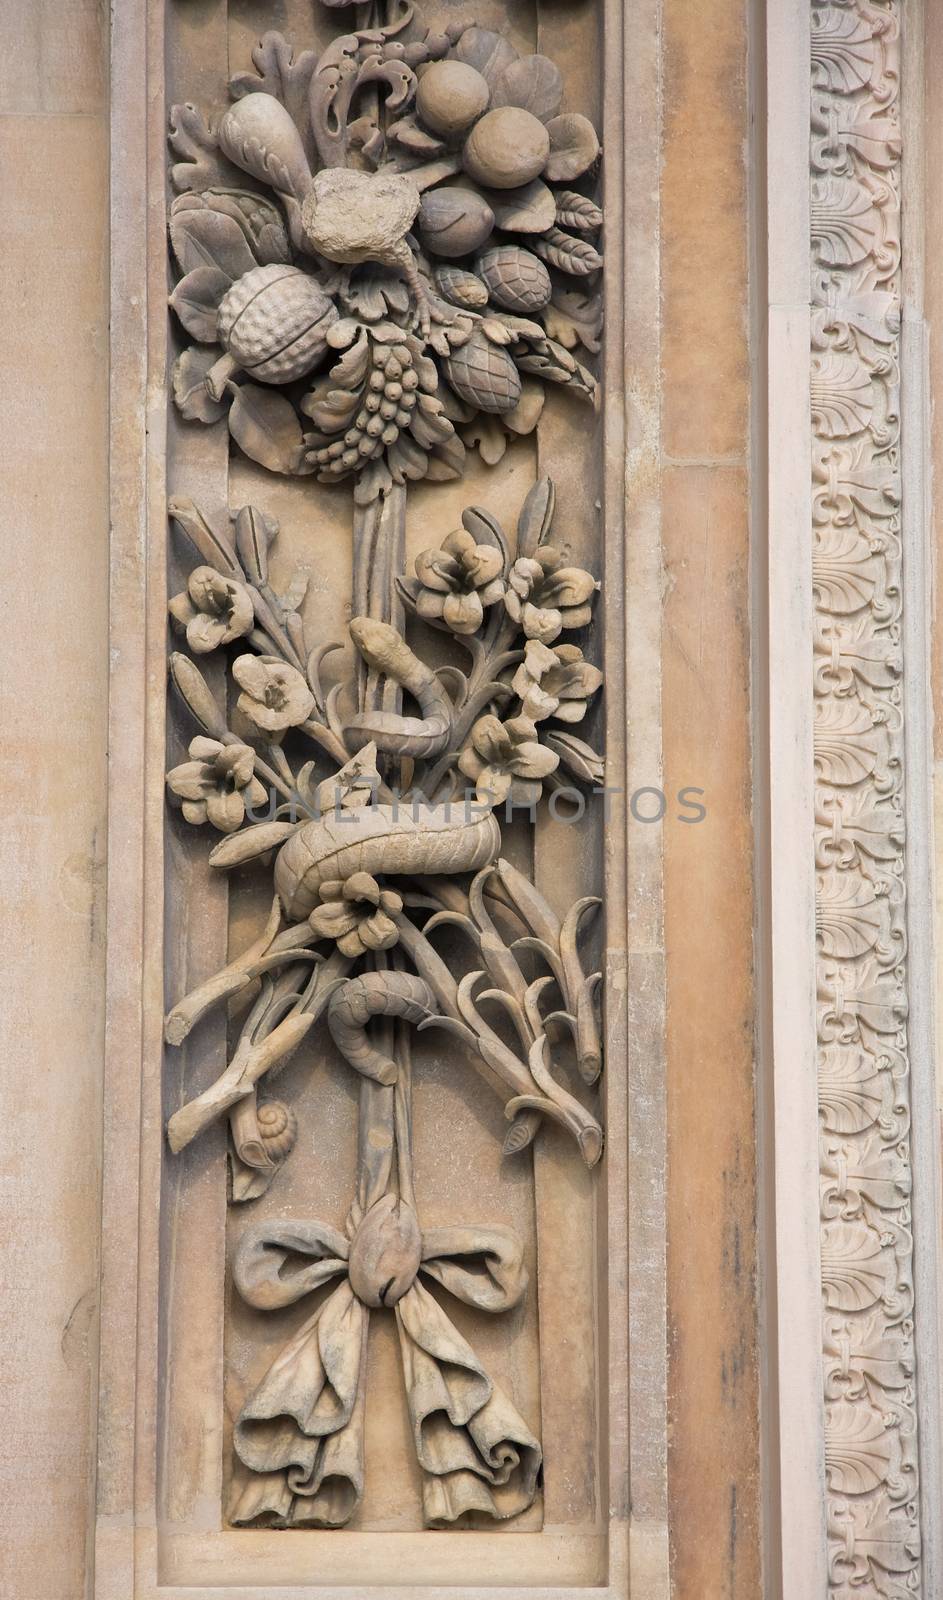 Decorative motif on the facade of cathedral in Milan by fotoecho